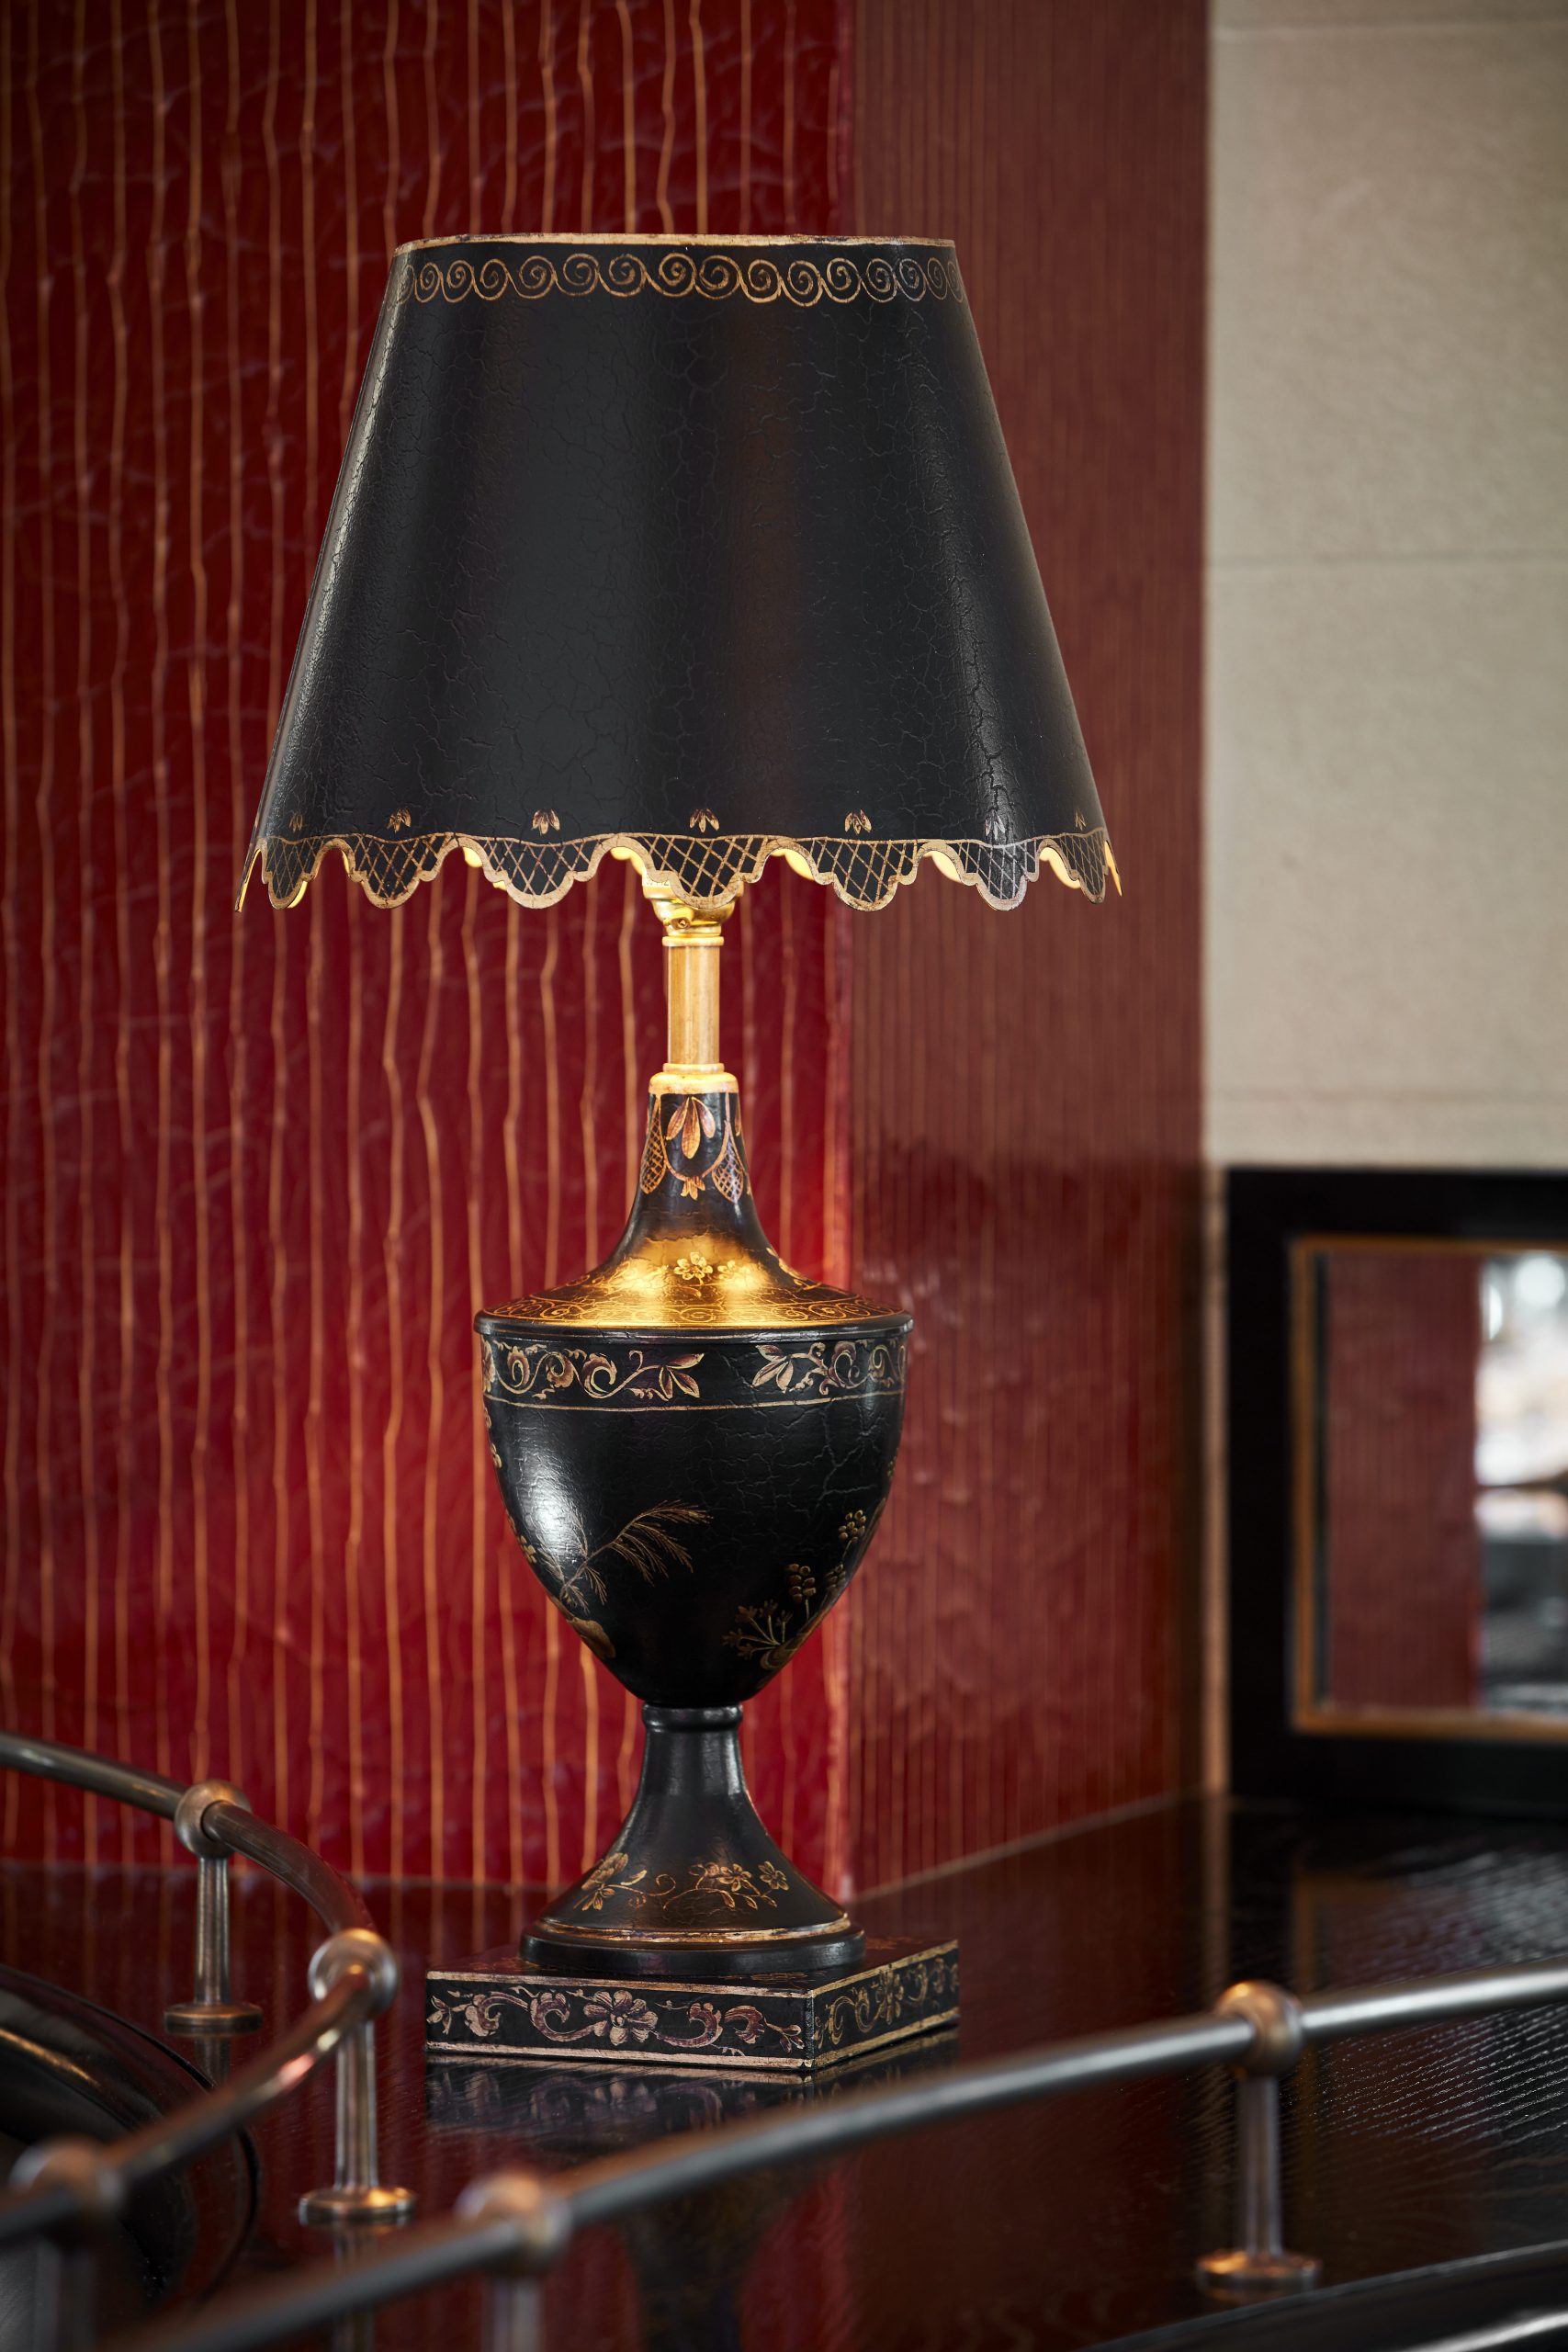 Classic table lamp on red cracked gesso background